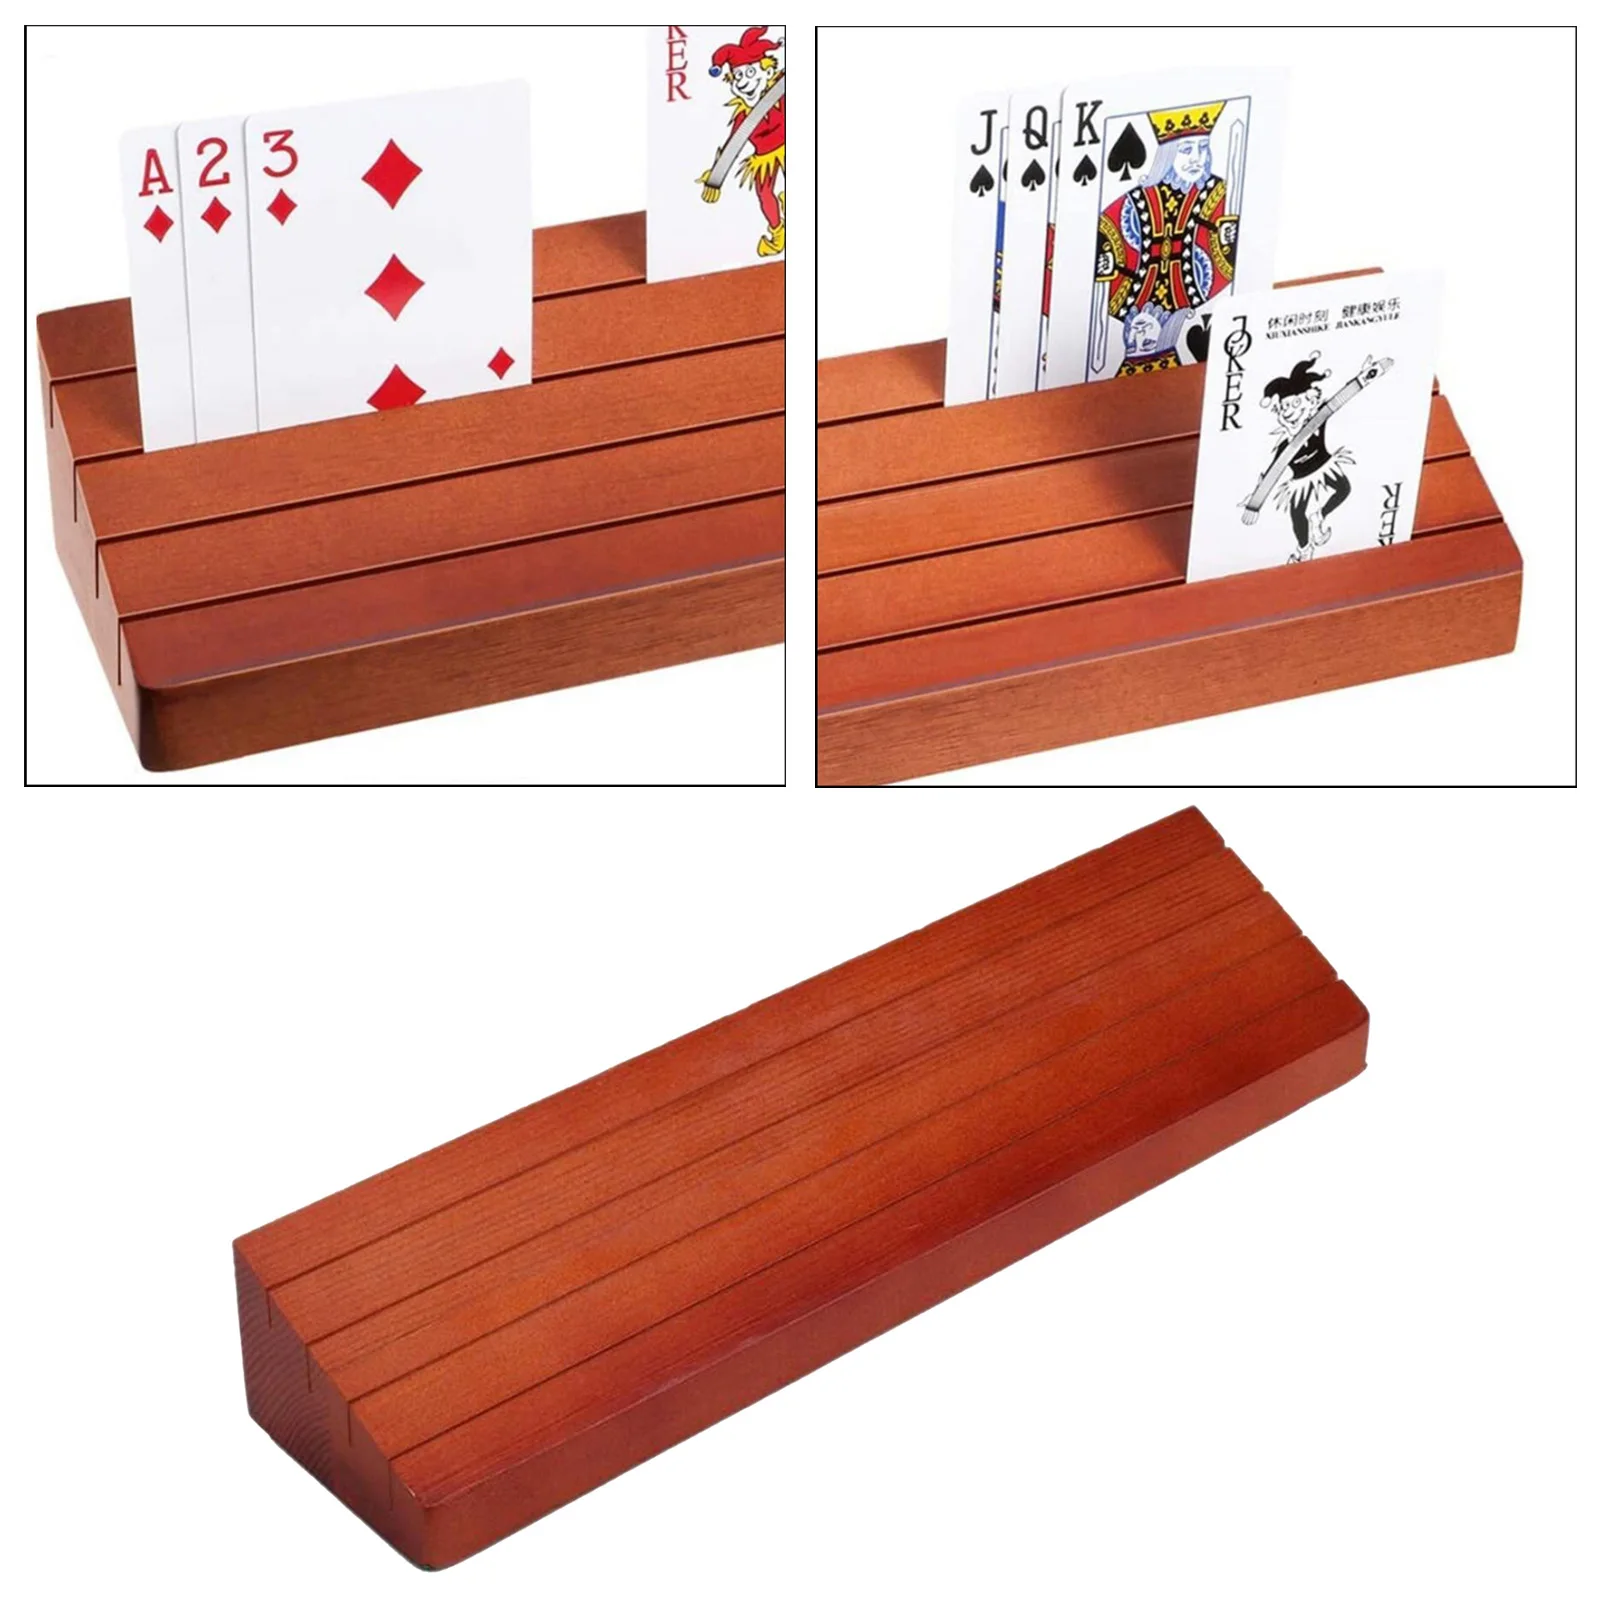 Details about   Playing Card Holder Wooden Seniors Card Game Holder Organizer Game Accessories 